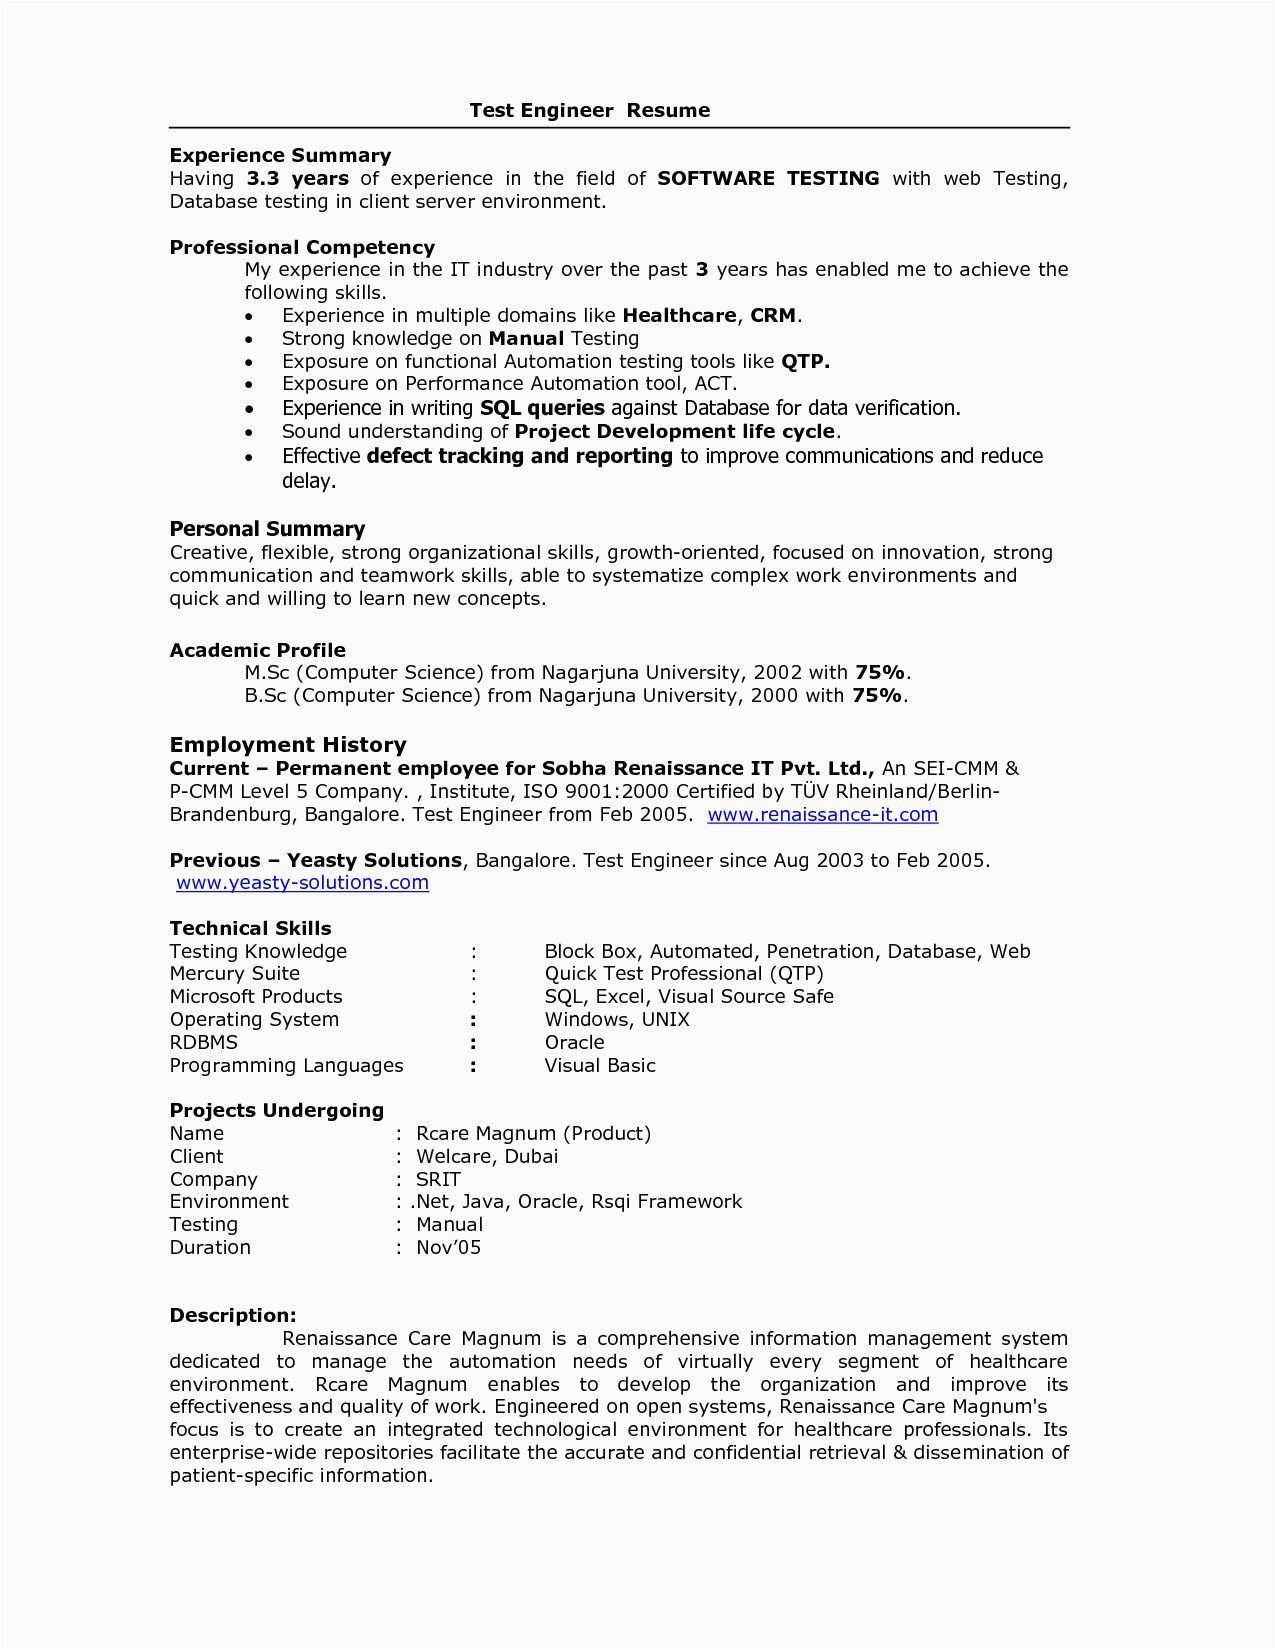 Manual Testing Resume Sample for 2 Years Experience Hr Resume Sample for 2 Years Experience Best Resume Examples